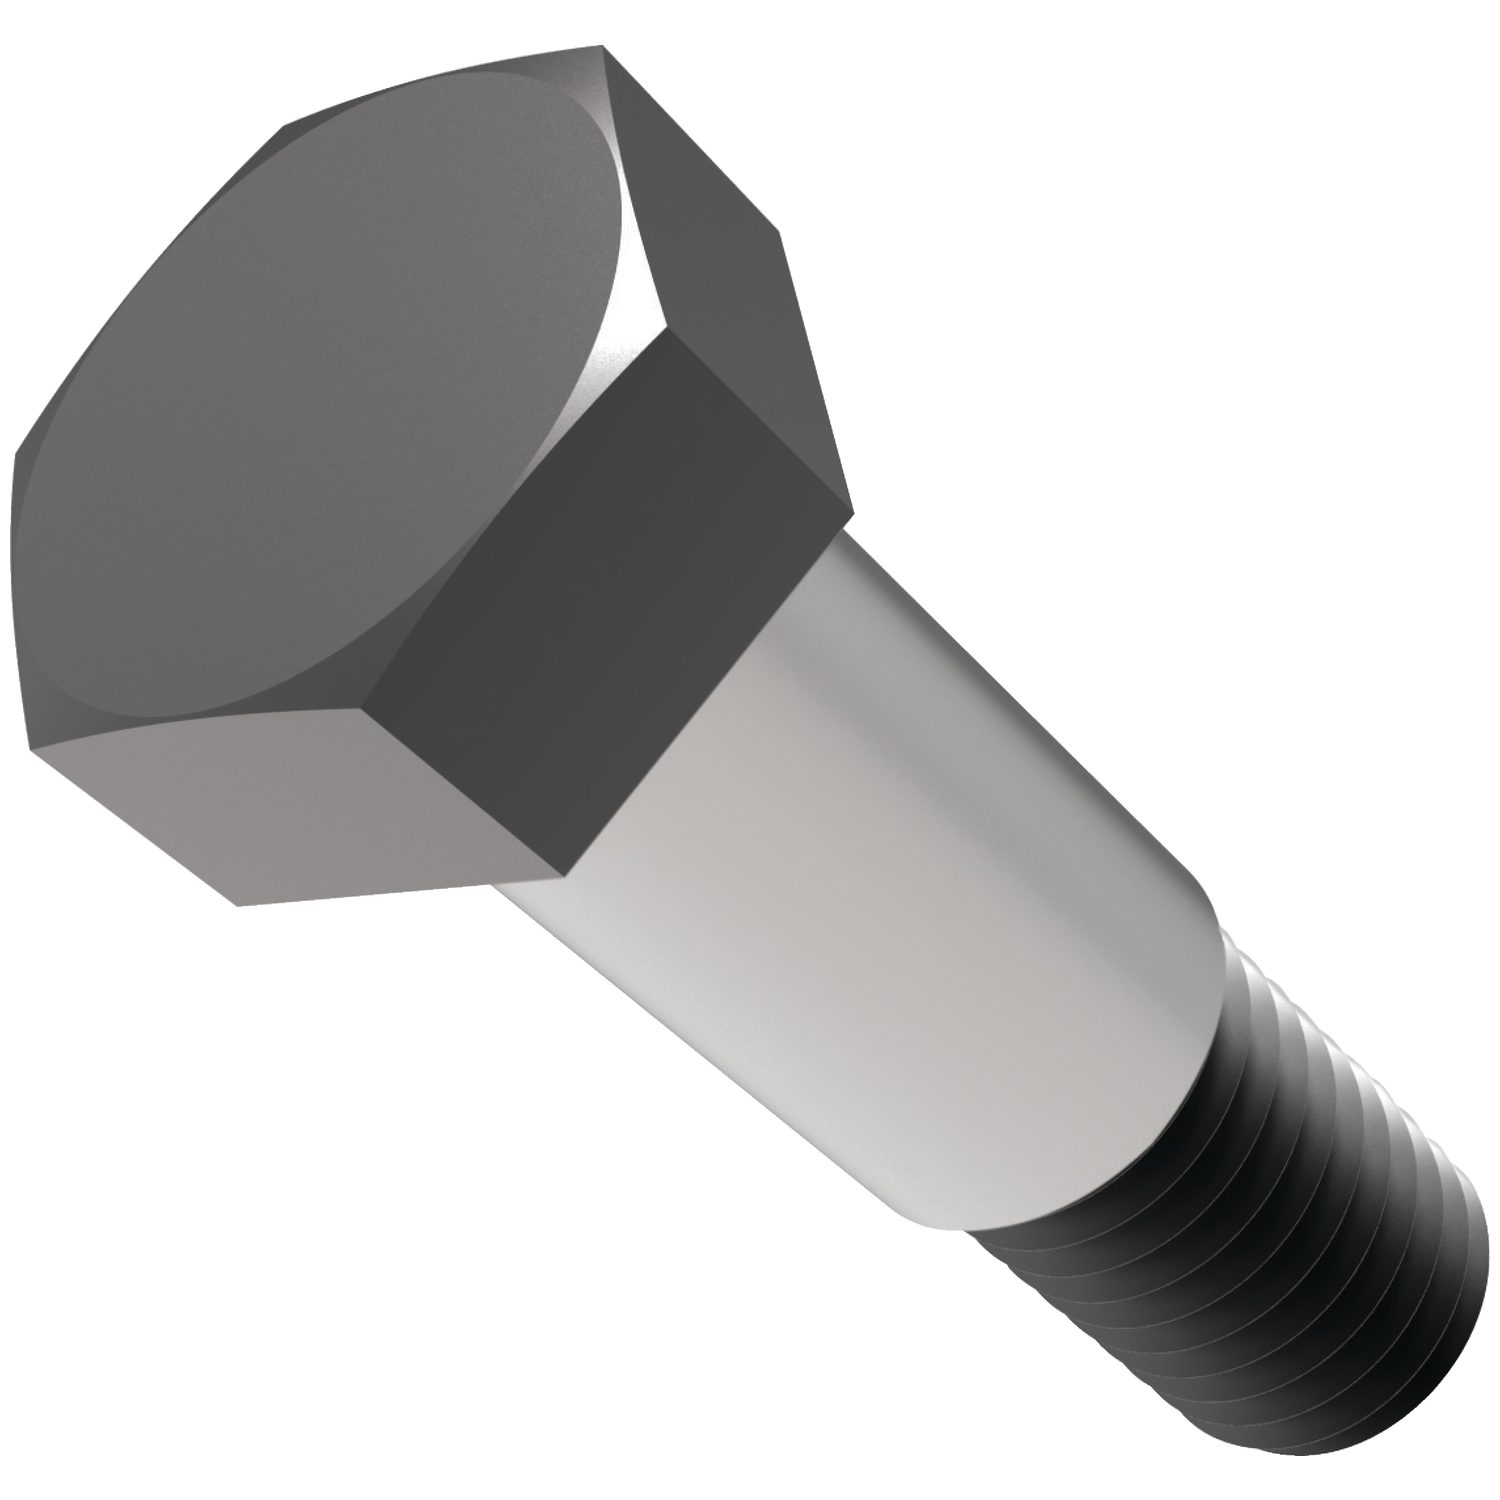 Stainless Shoulder Bolts Stainless shoulder bolts available in small, standard and long sizes.